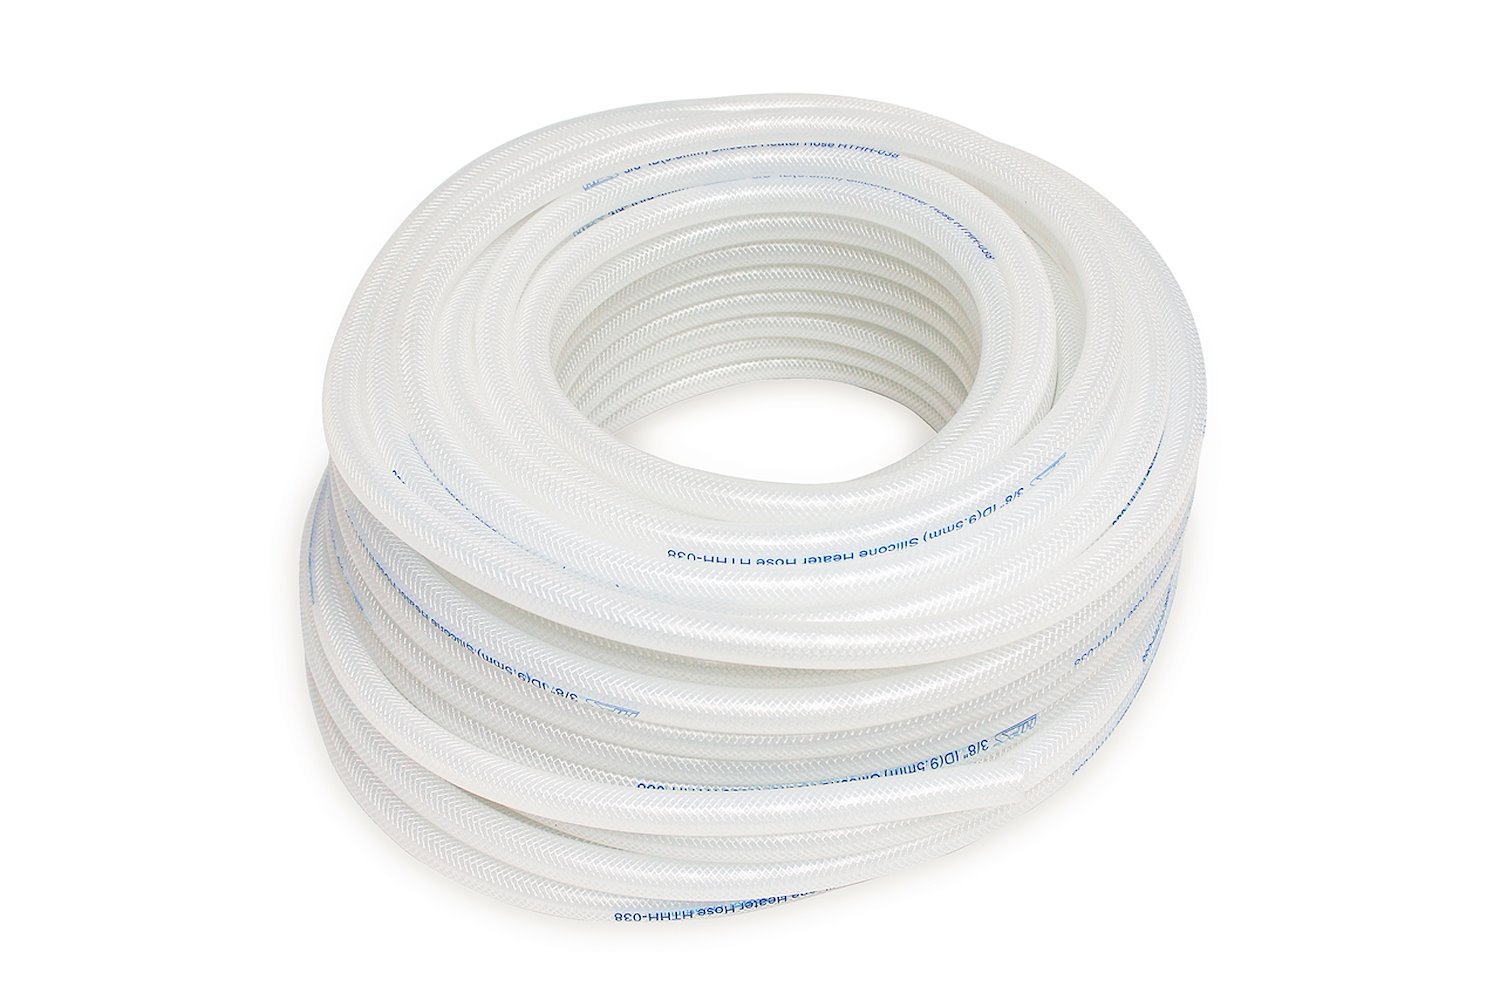 HTHH-087-CLEARx50 Silicone Heater Hose Tubing, High-Temp Reinforced, 7/8 in. ID, 50 ft. Roll, Clear